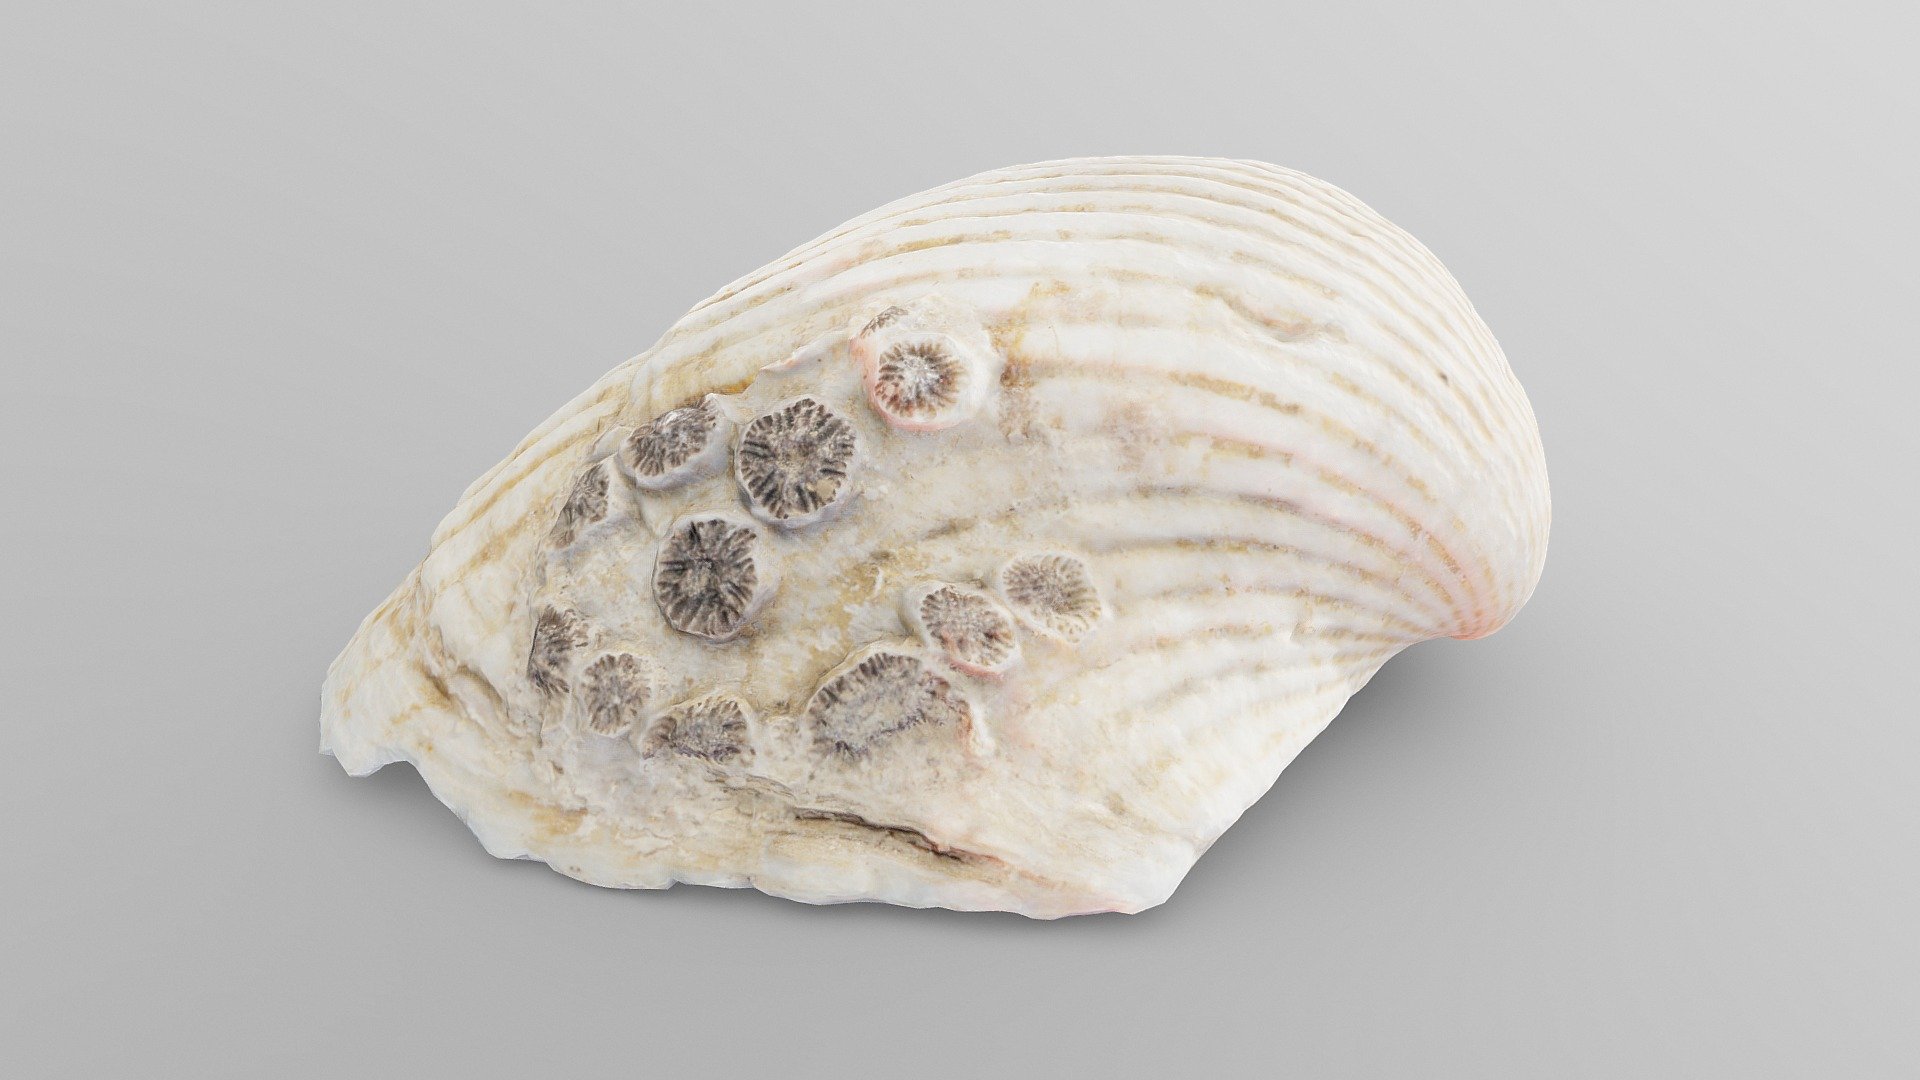 Cockie Sea Shell Buy Royalty Free 3d Model By Drakery Ac04e0e Sketchfab Store